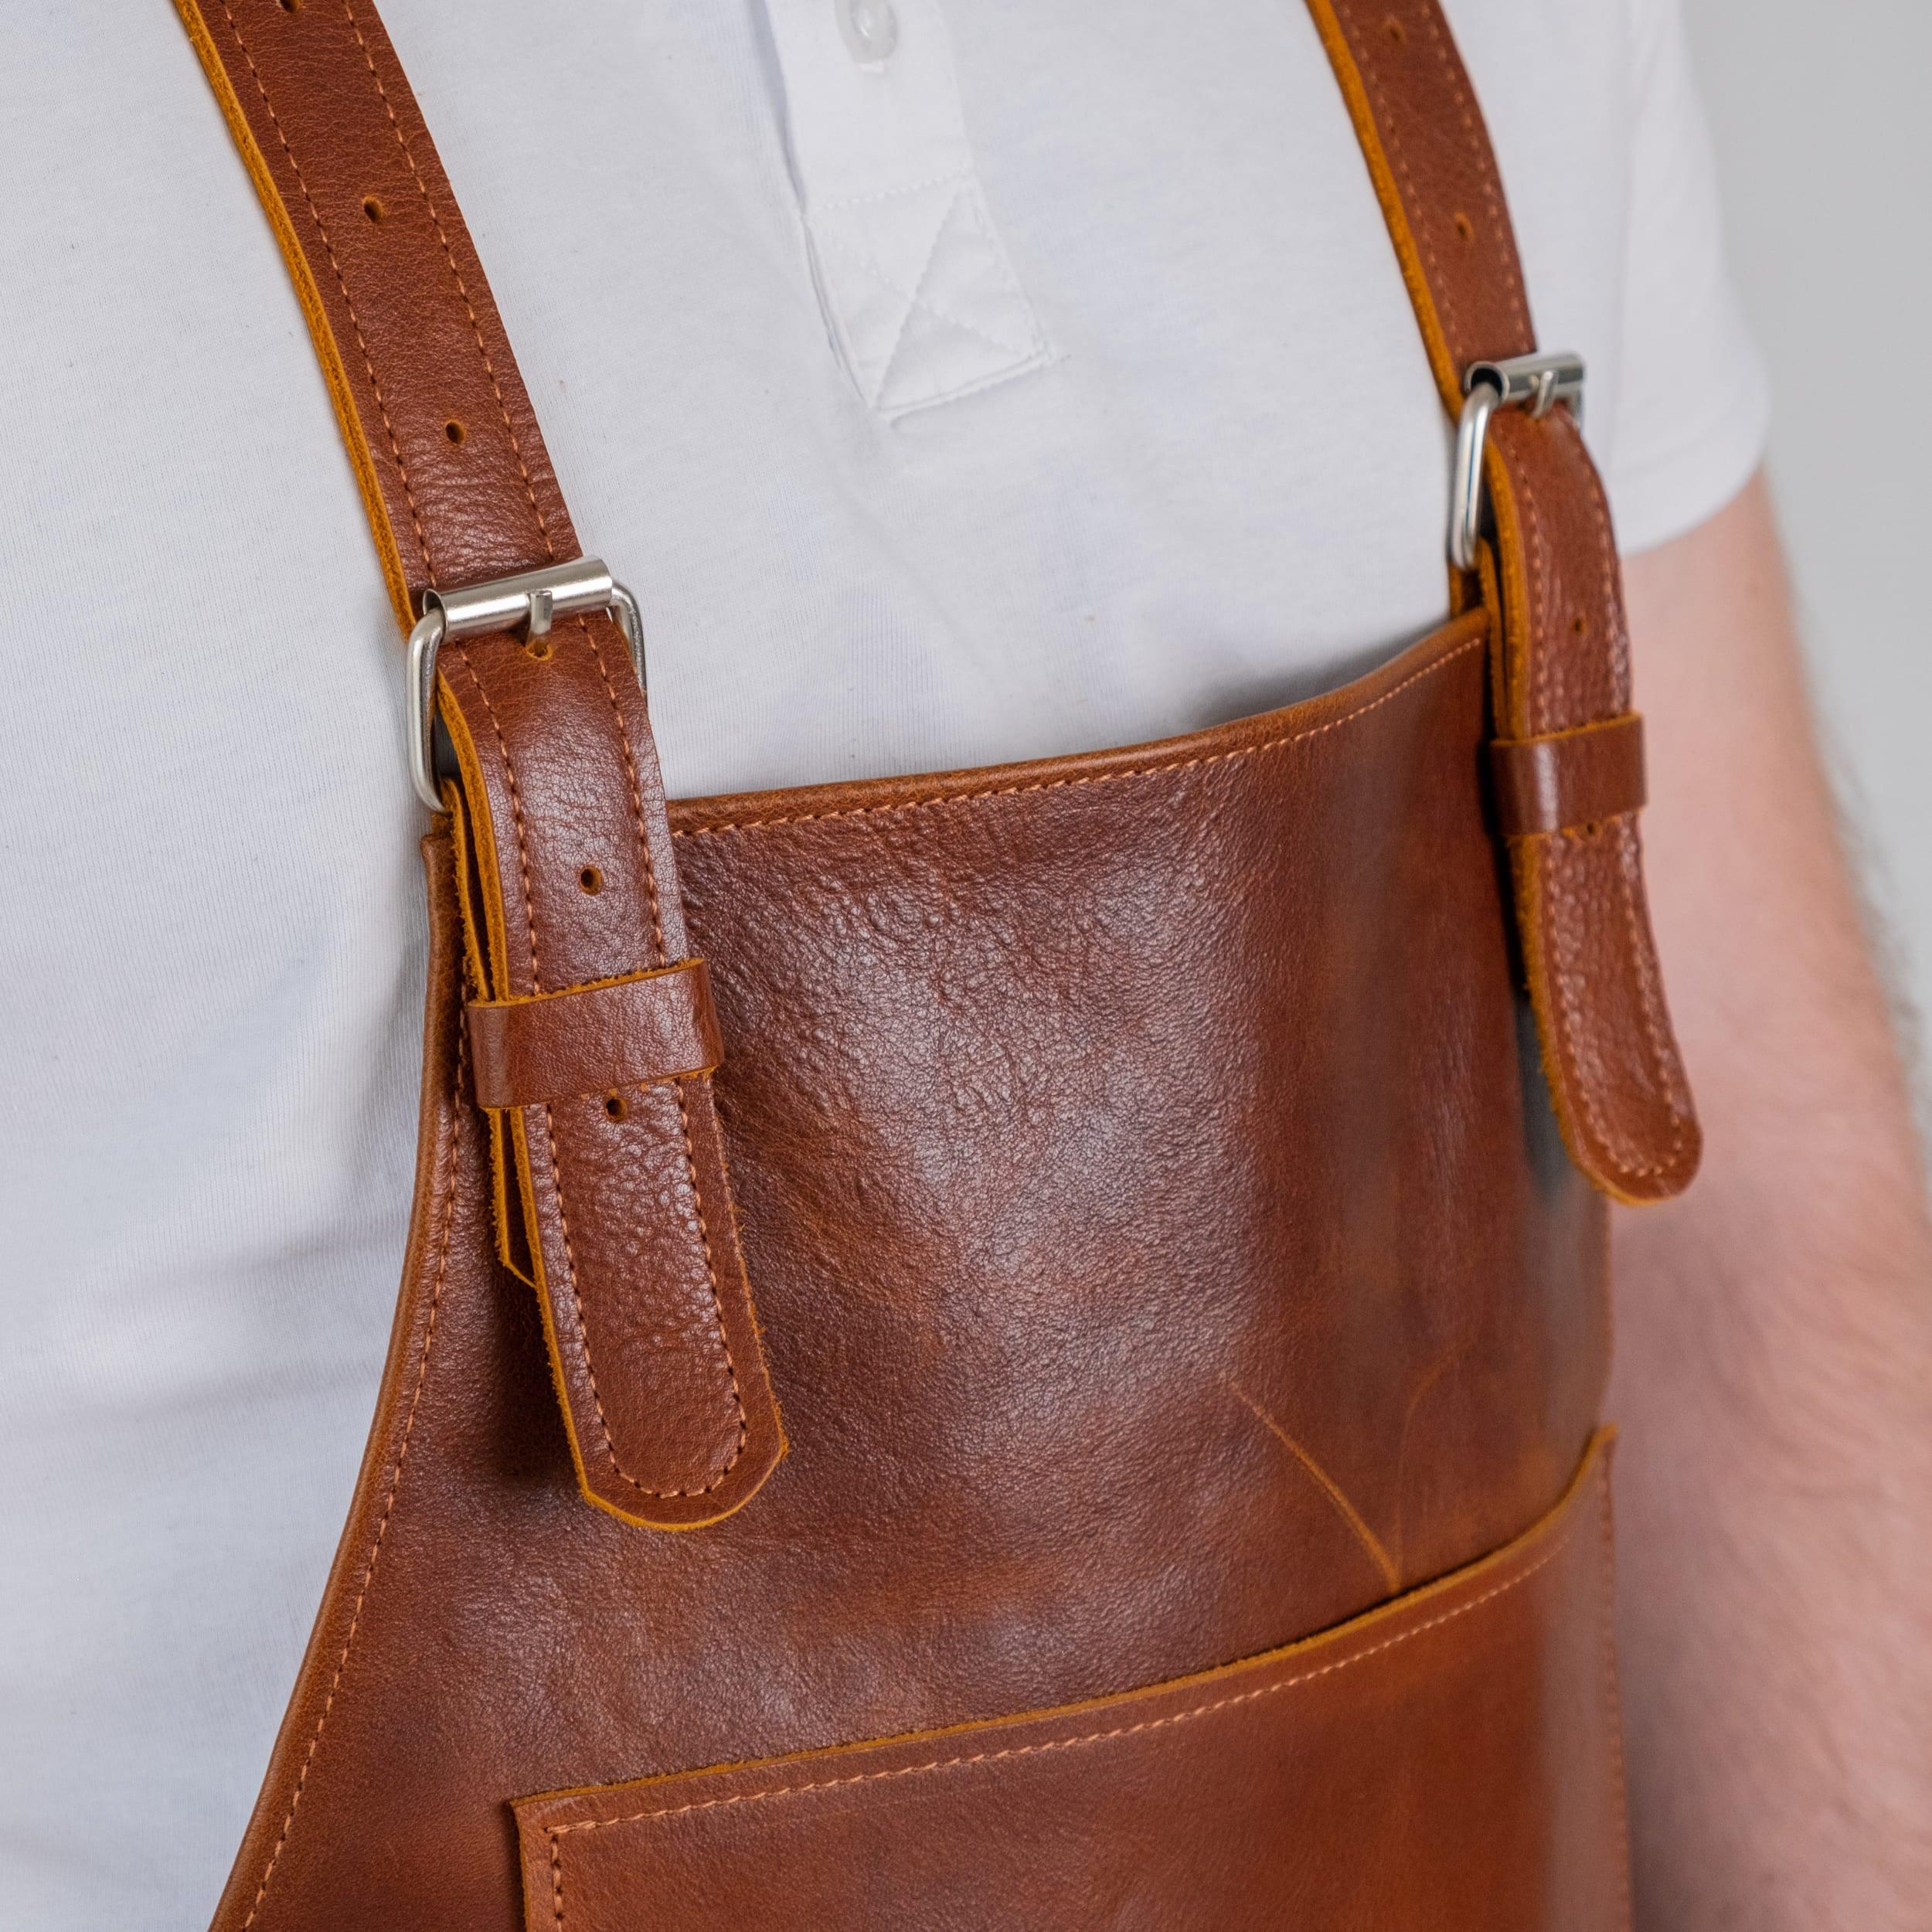 Leather Apron for Men - Pikore